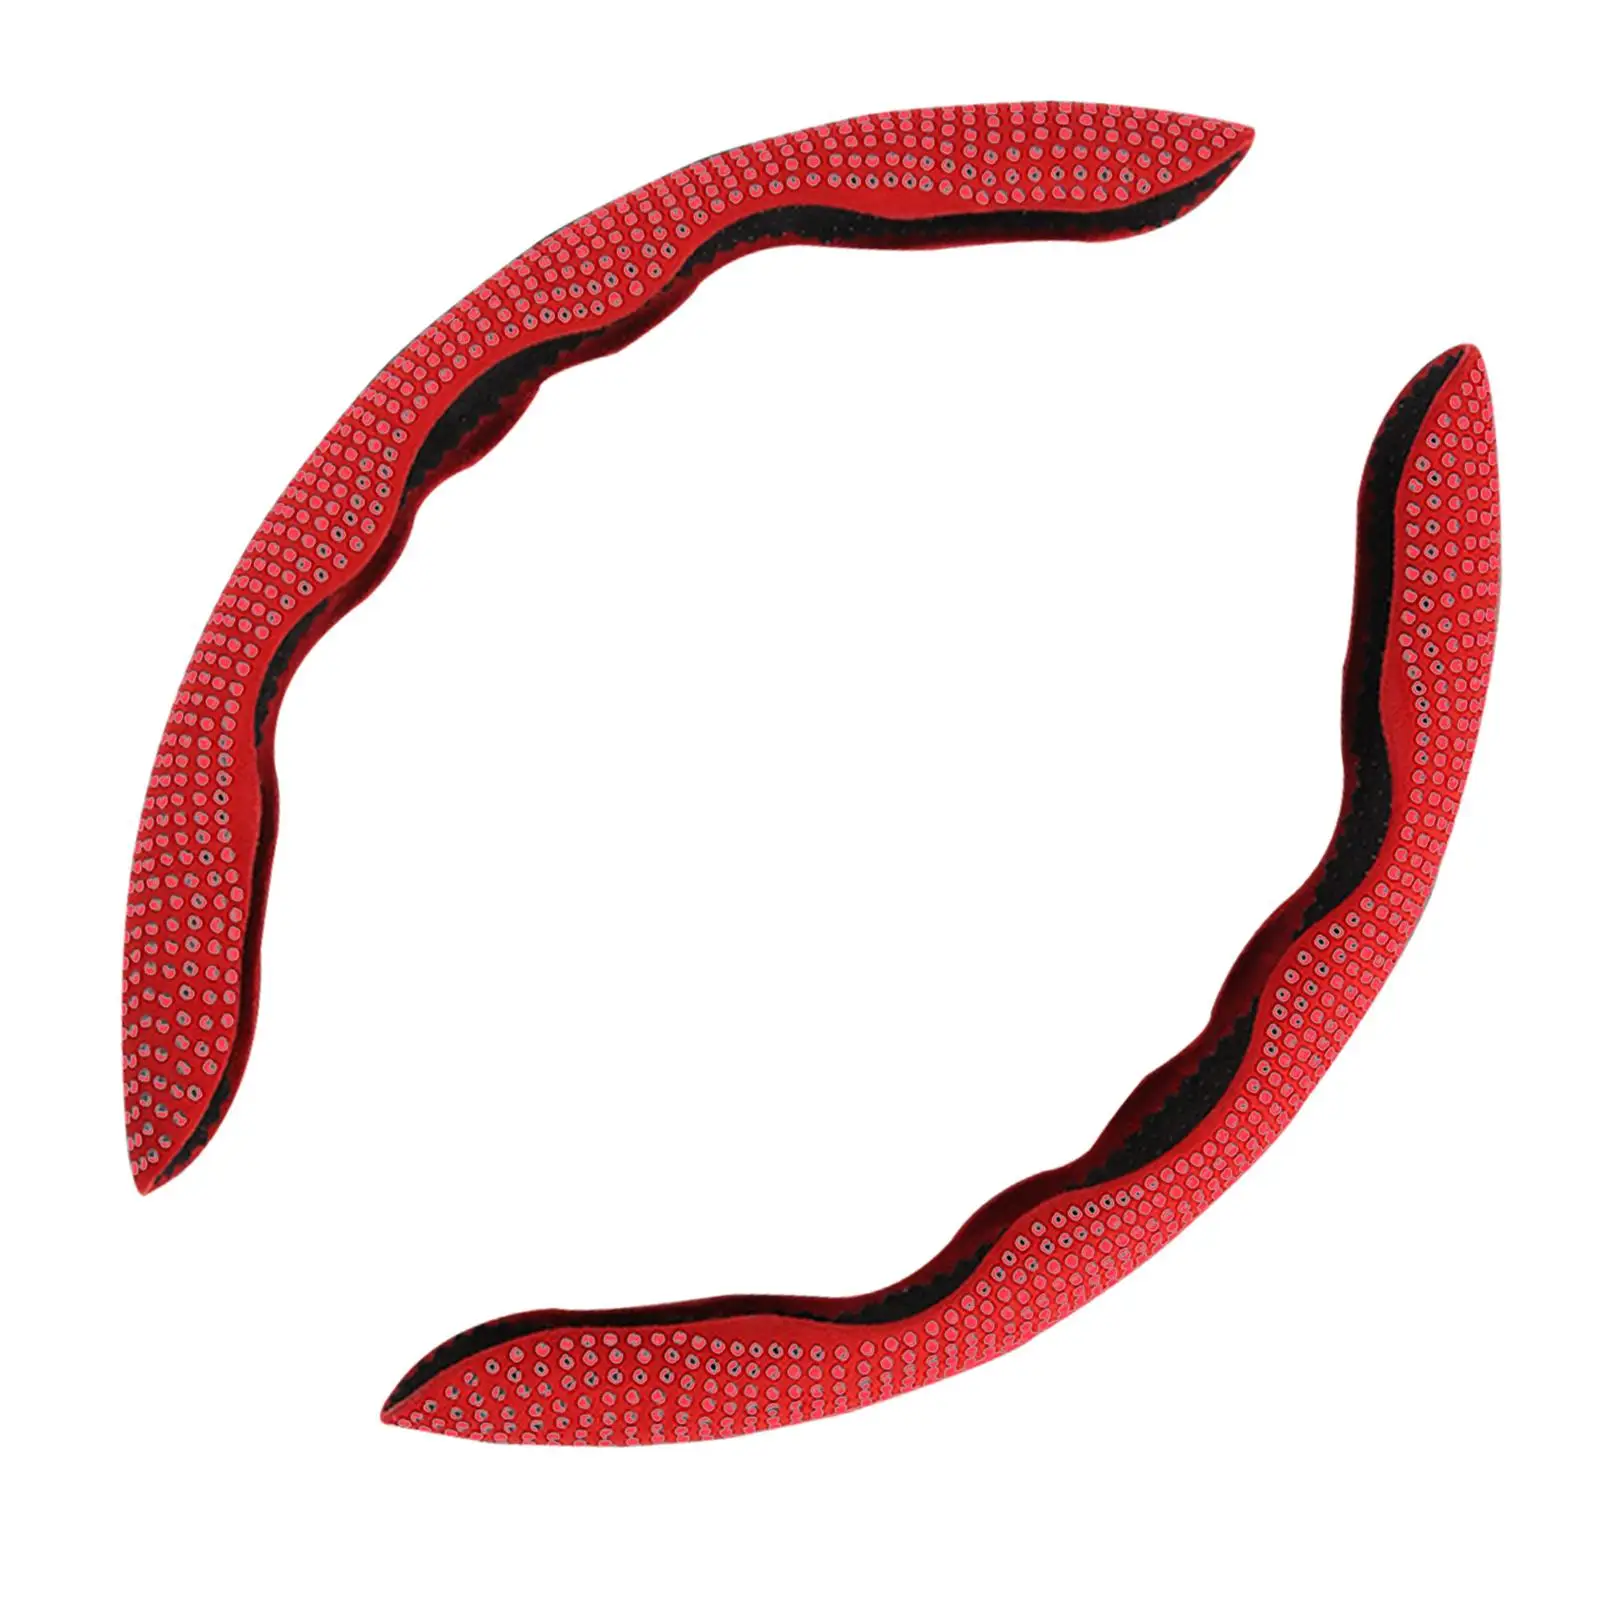 2Pcs Steering Wheel Covers Easy Installation Steering Wheel Protector for Diameter 38cm Steering Wheels Truck Men and Women